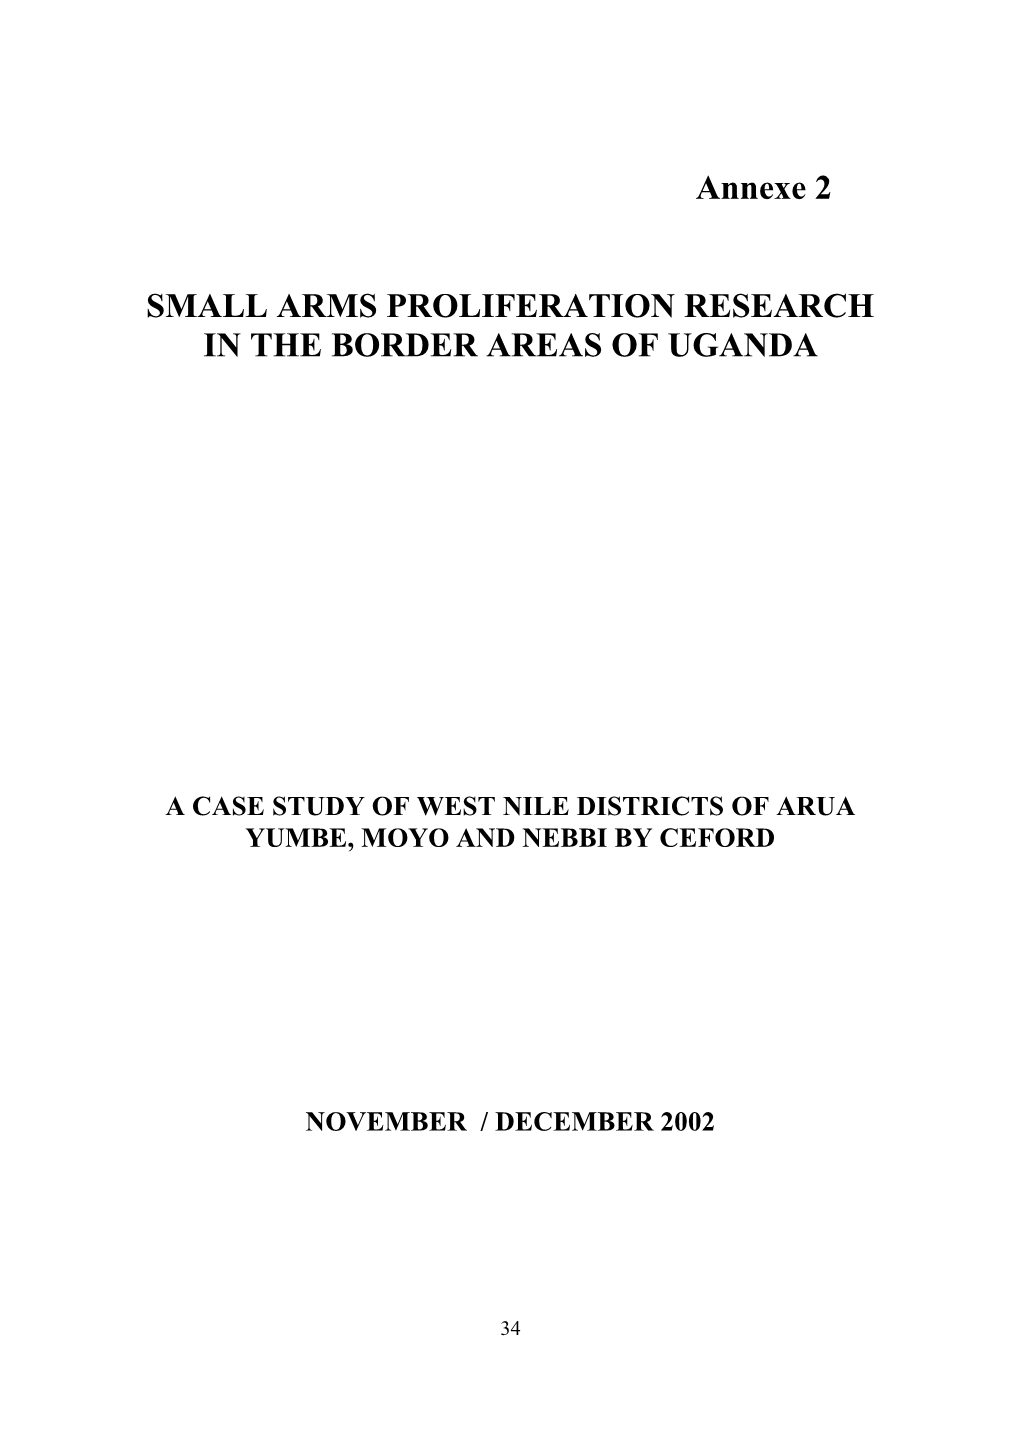 Annexe 2 SMALL ARMS PROLIFERATION RESEARCH IN